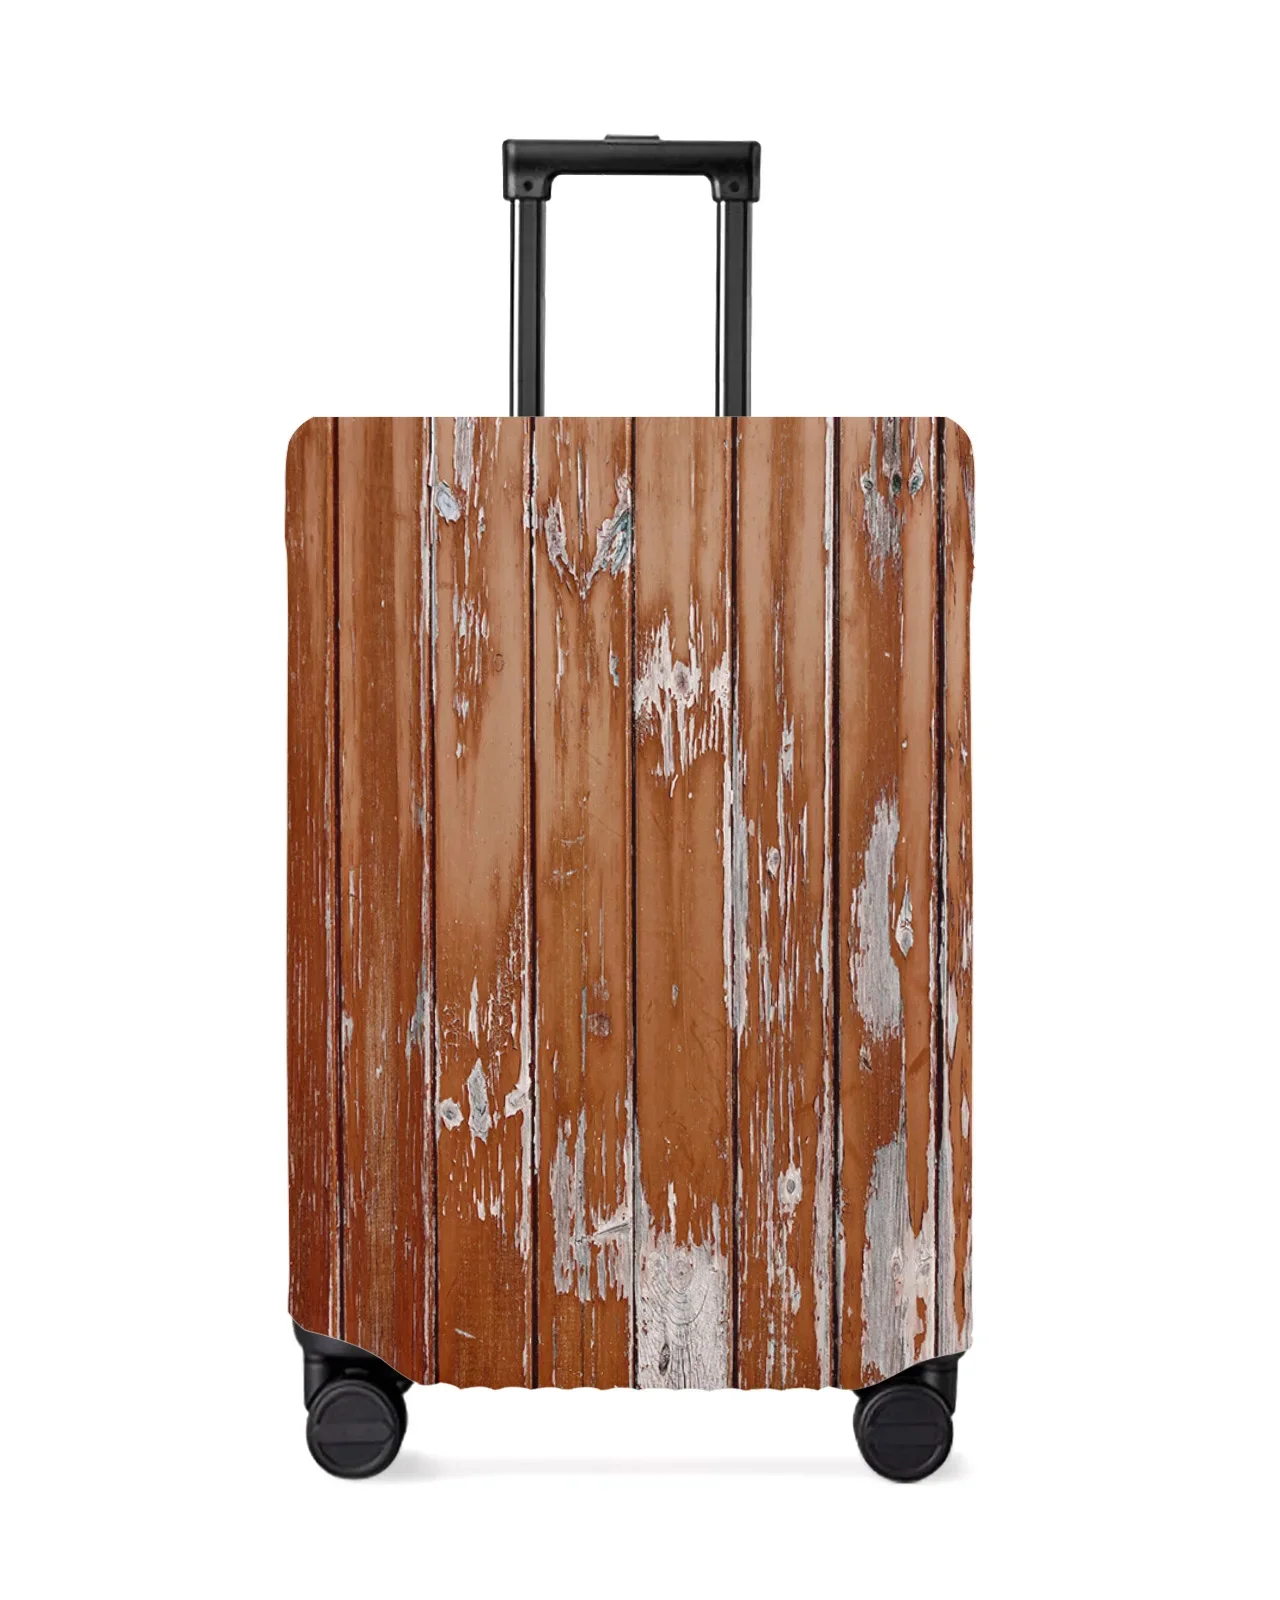 

Wood Grain Vintage Farm Brown Luggage Cover Stretch Suitcase Protector Baggage Dust Cover for 18-32 Inch Travel Suitcase Case